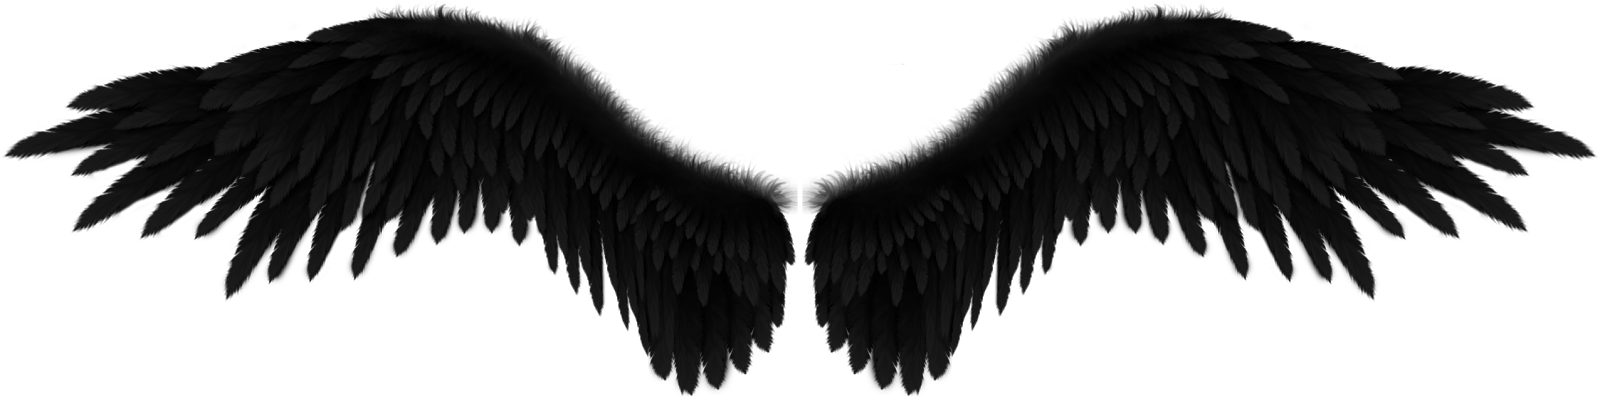 Black Angel Wings Graphic PNG